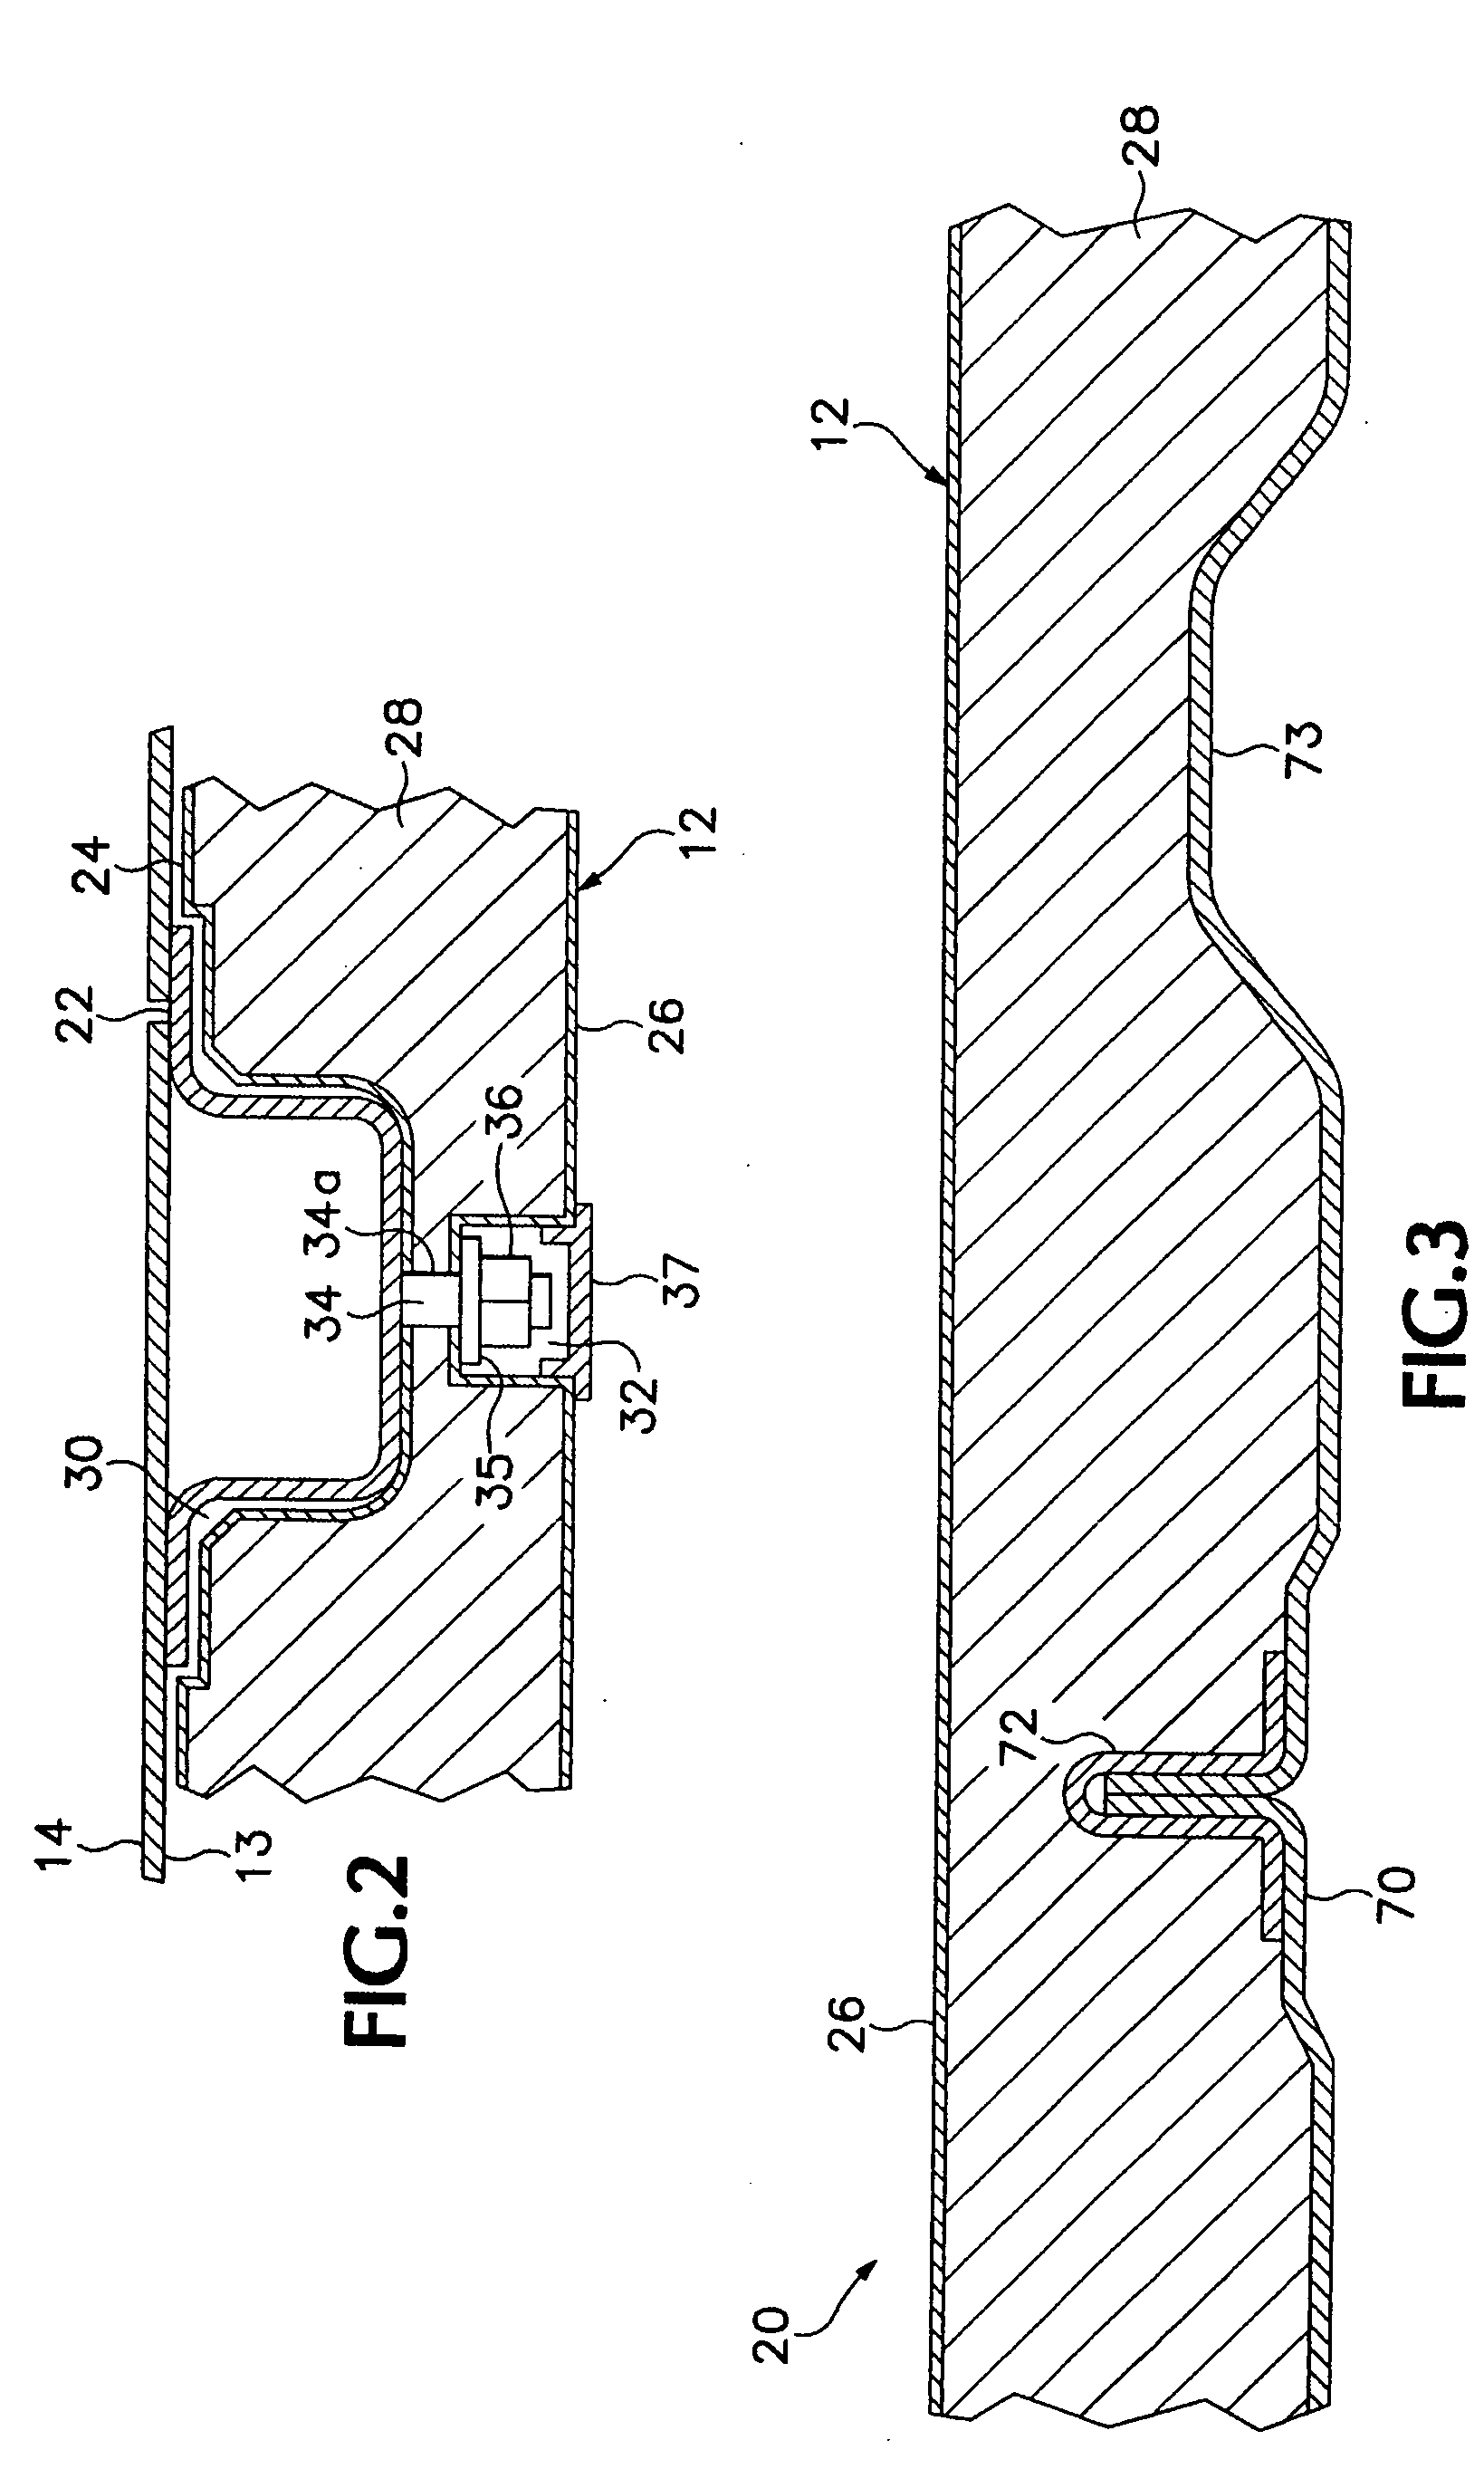 Insulative panels for a railway boxcar